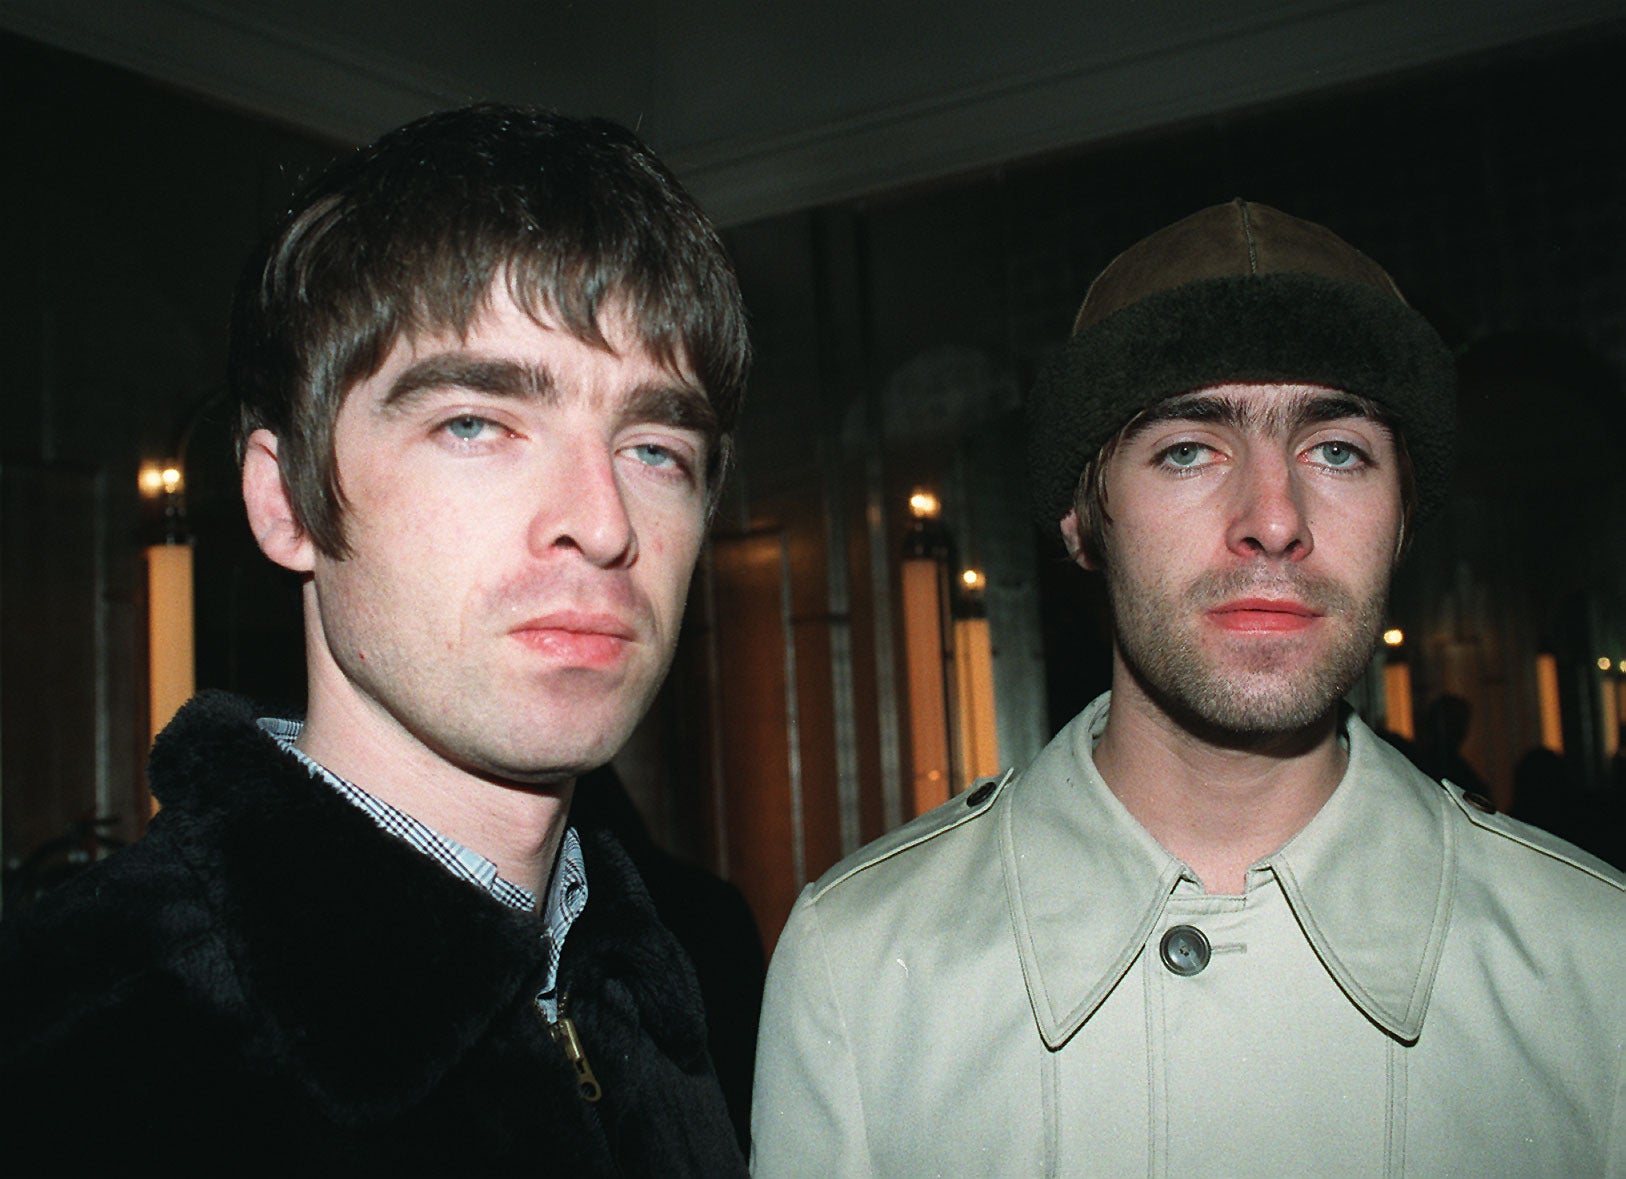 Oasis performed together for the last time at the V Festival slot on 22 August 2009. Less than a week later, Noel admitted he could no longer work with Liam and that the band was finished